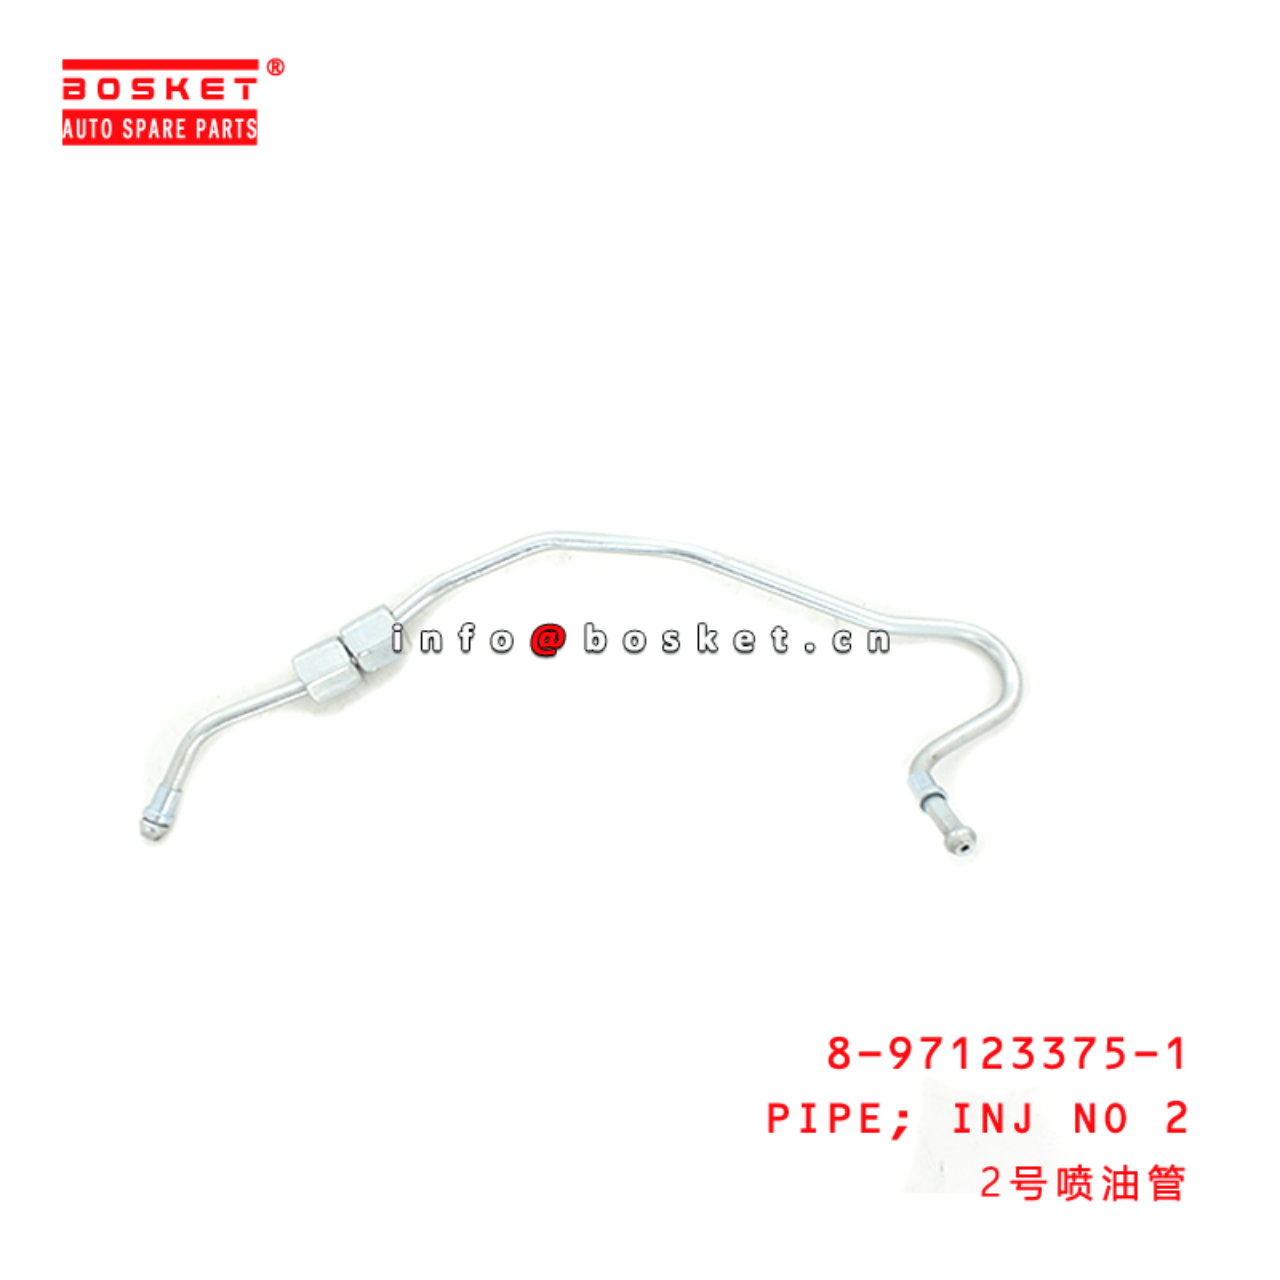  8-97123375-1 Injection No 2 Pipe 8971233751 Suitable for ISUZU XD